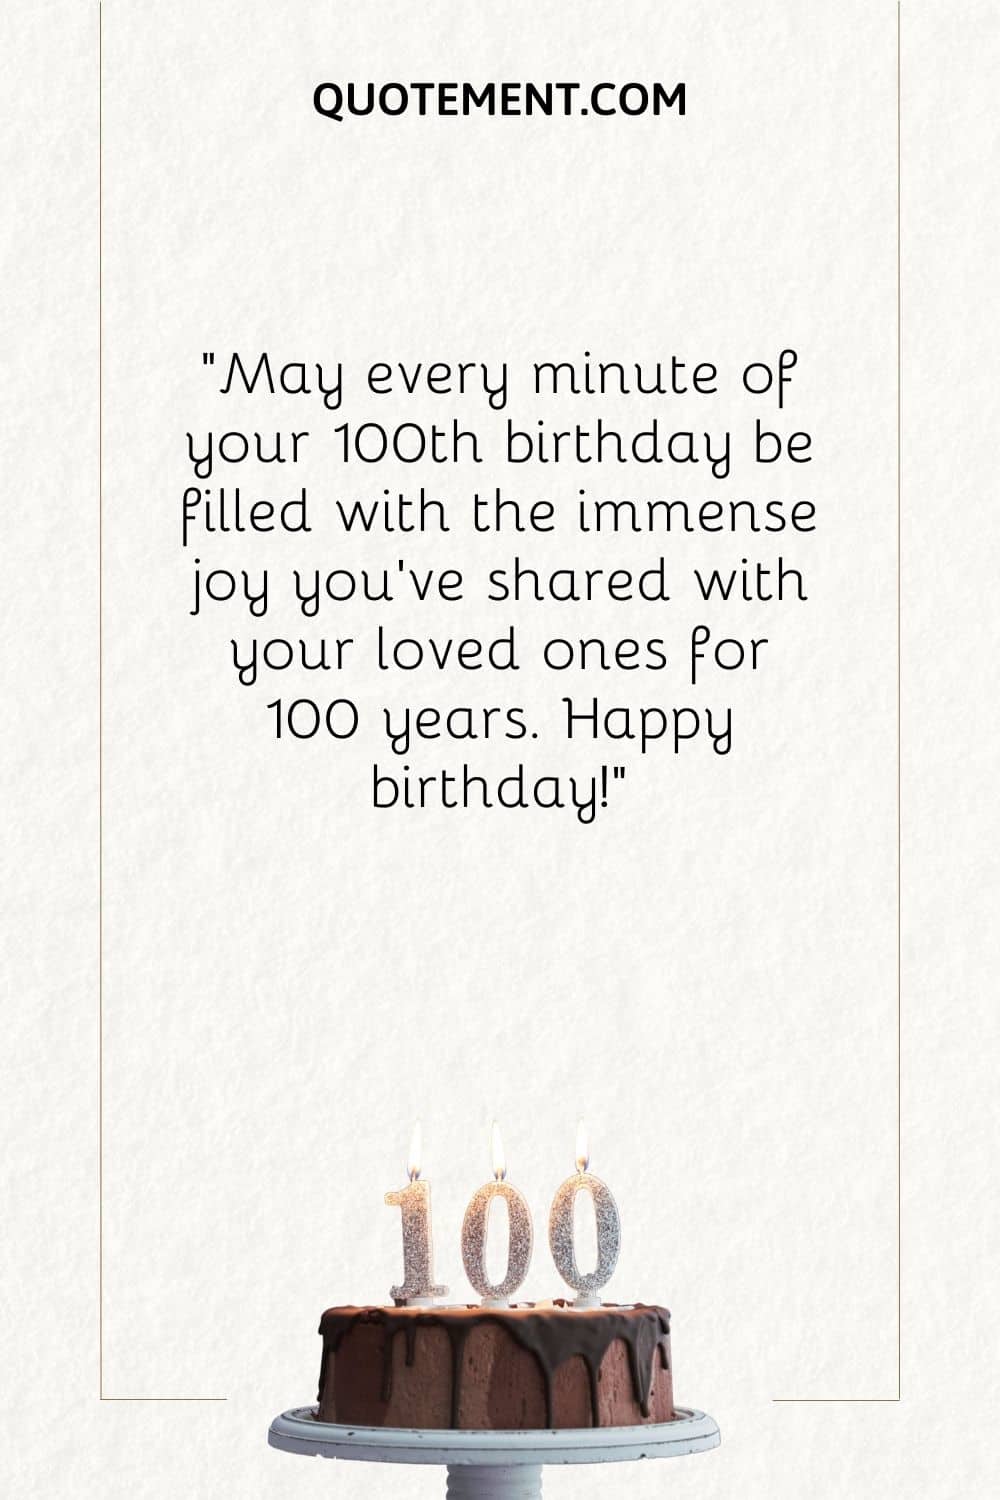 May every minute of your 100th birthday be filled with the immense joy you’ve shared with your loved ones for 100 years